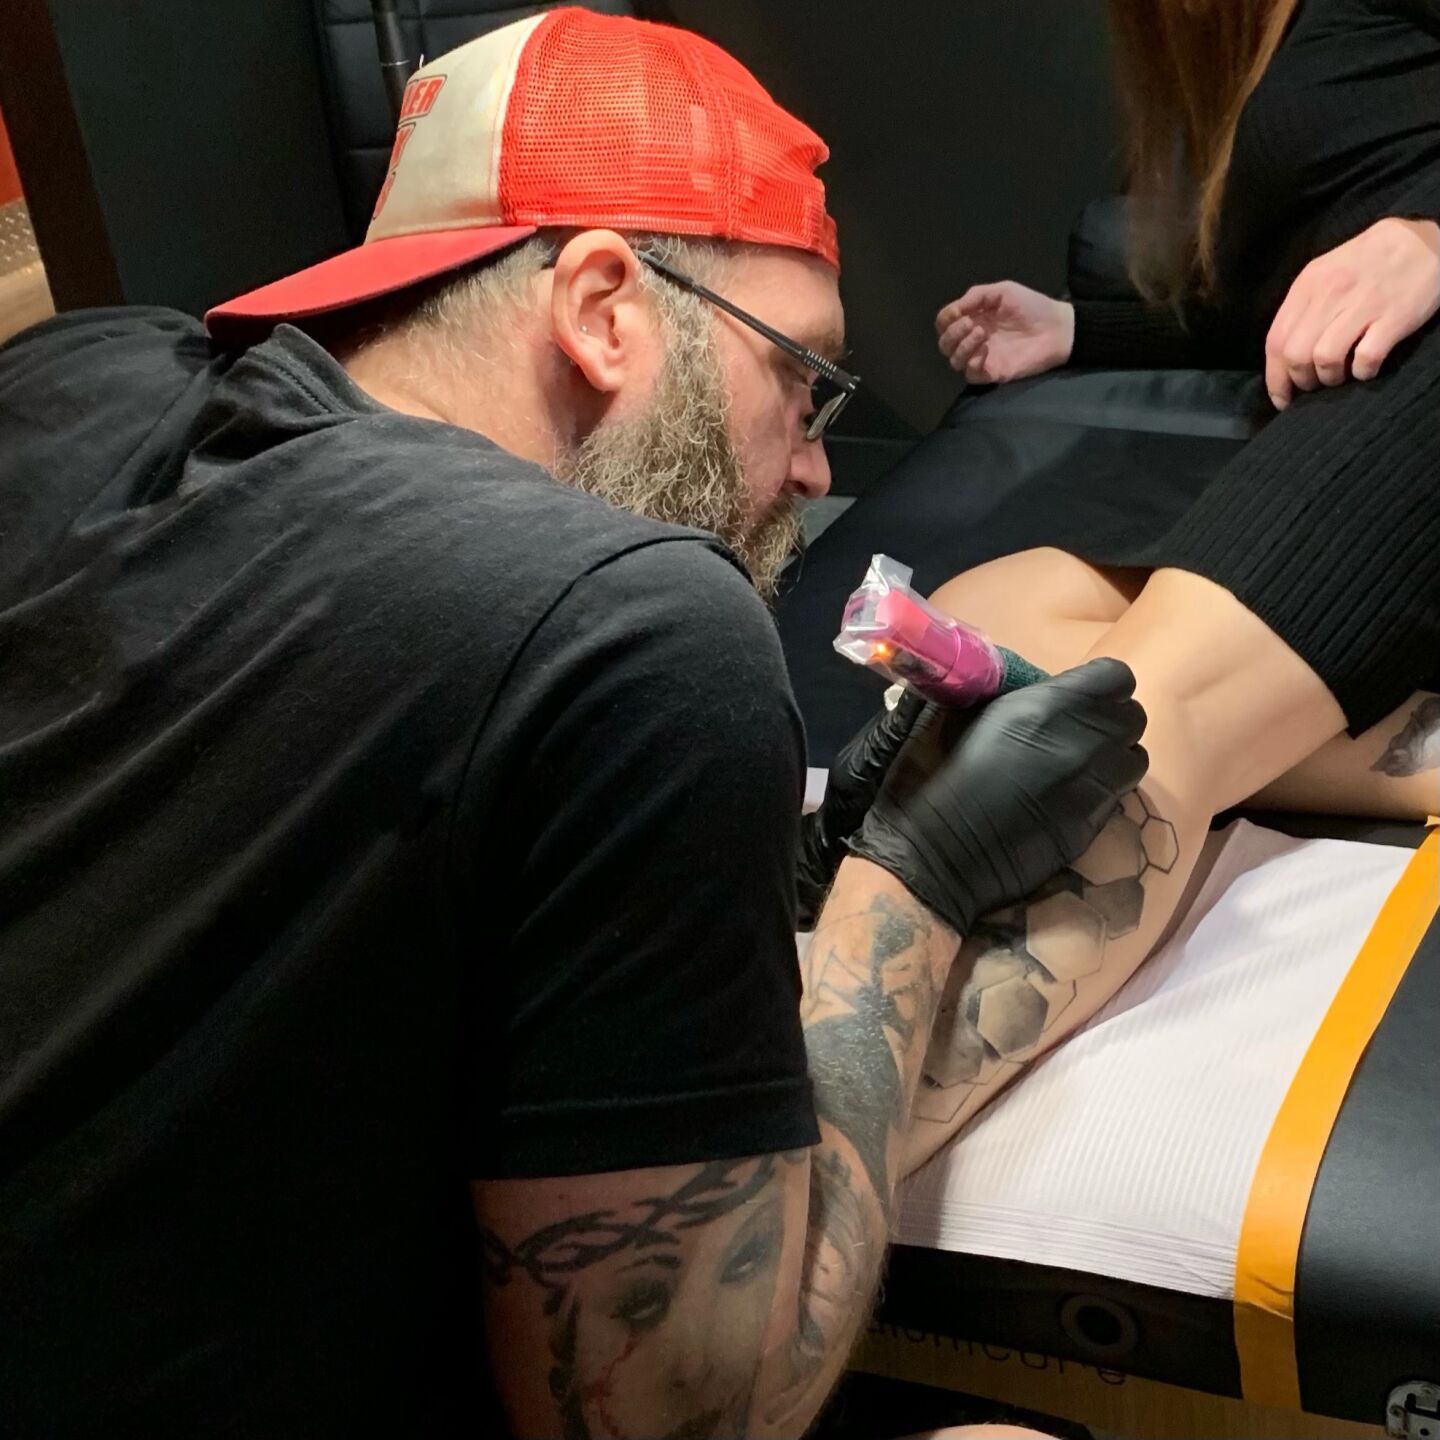 Apprenticeship rule proposed for tattoo bodypiercing licensing in  Lancaster  Local News  lancasteronlinecom